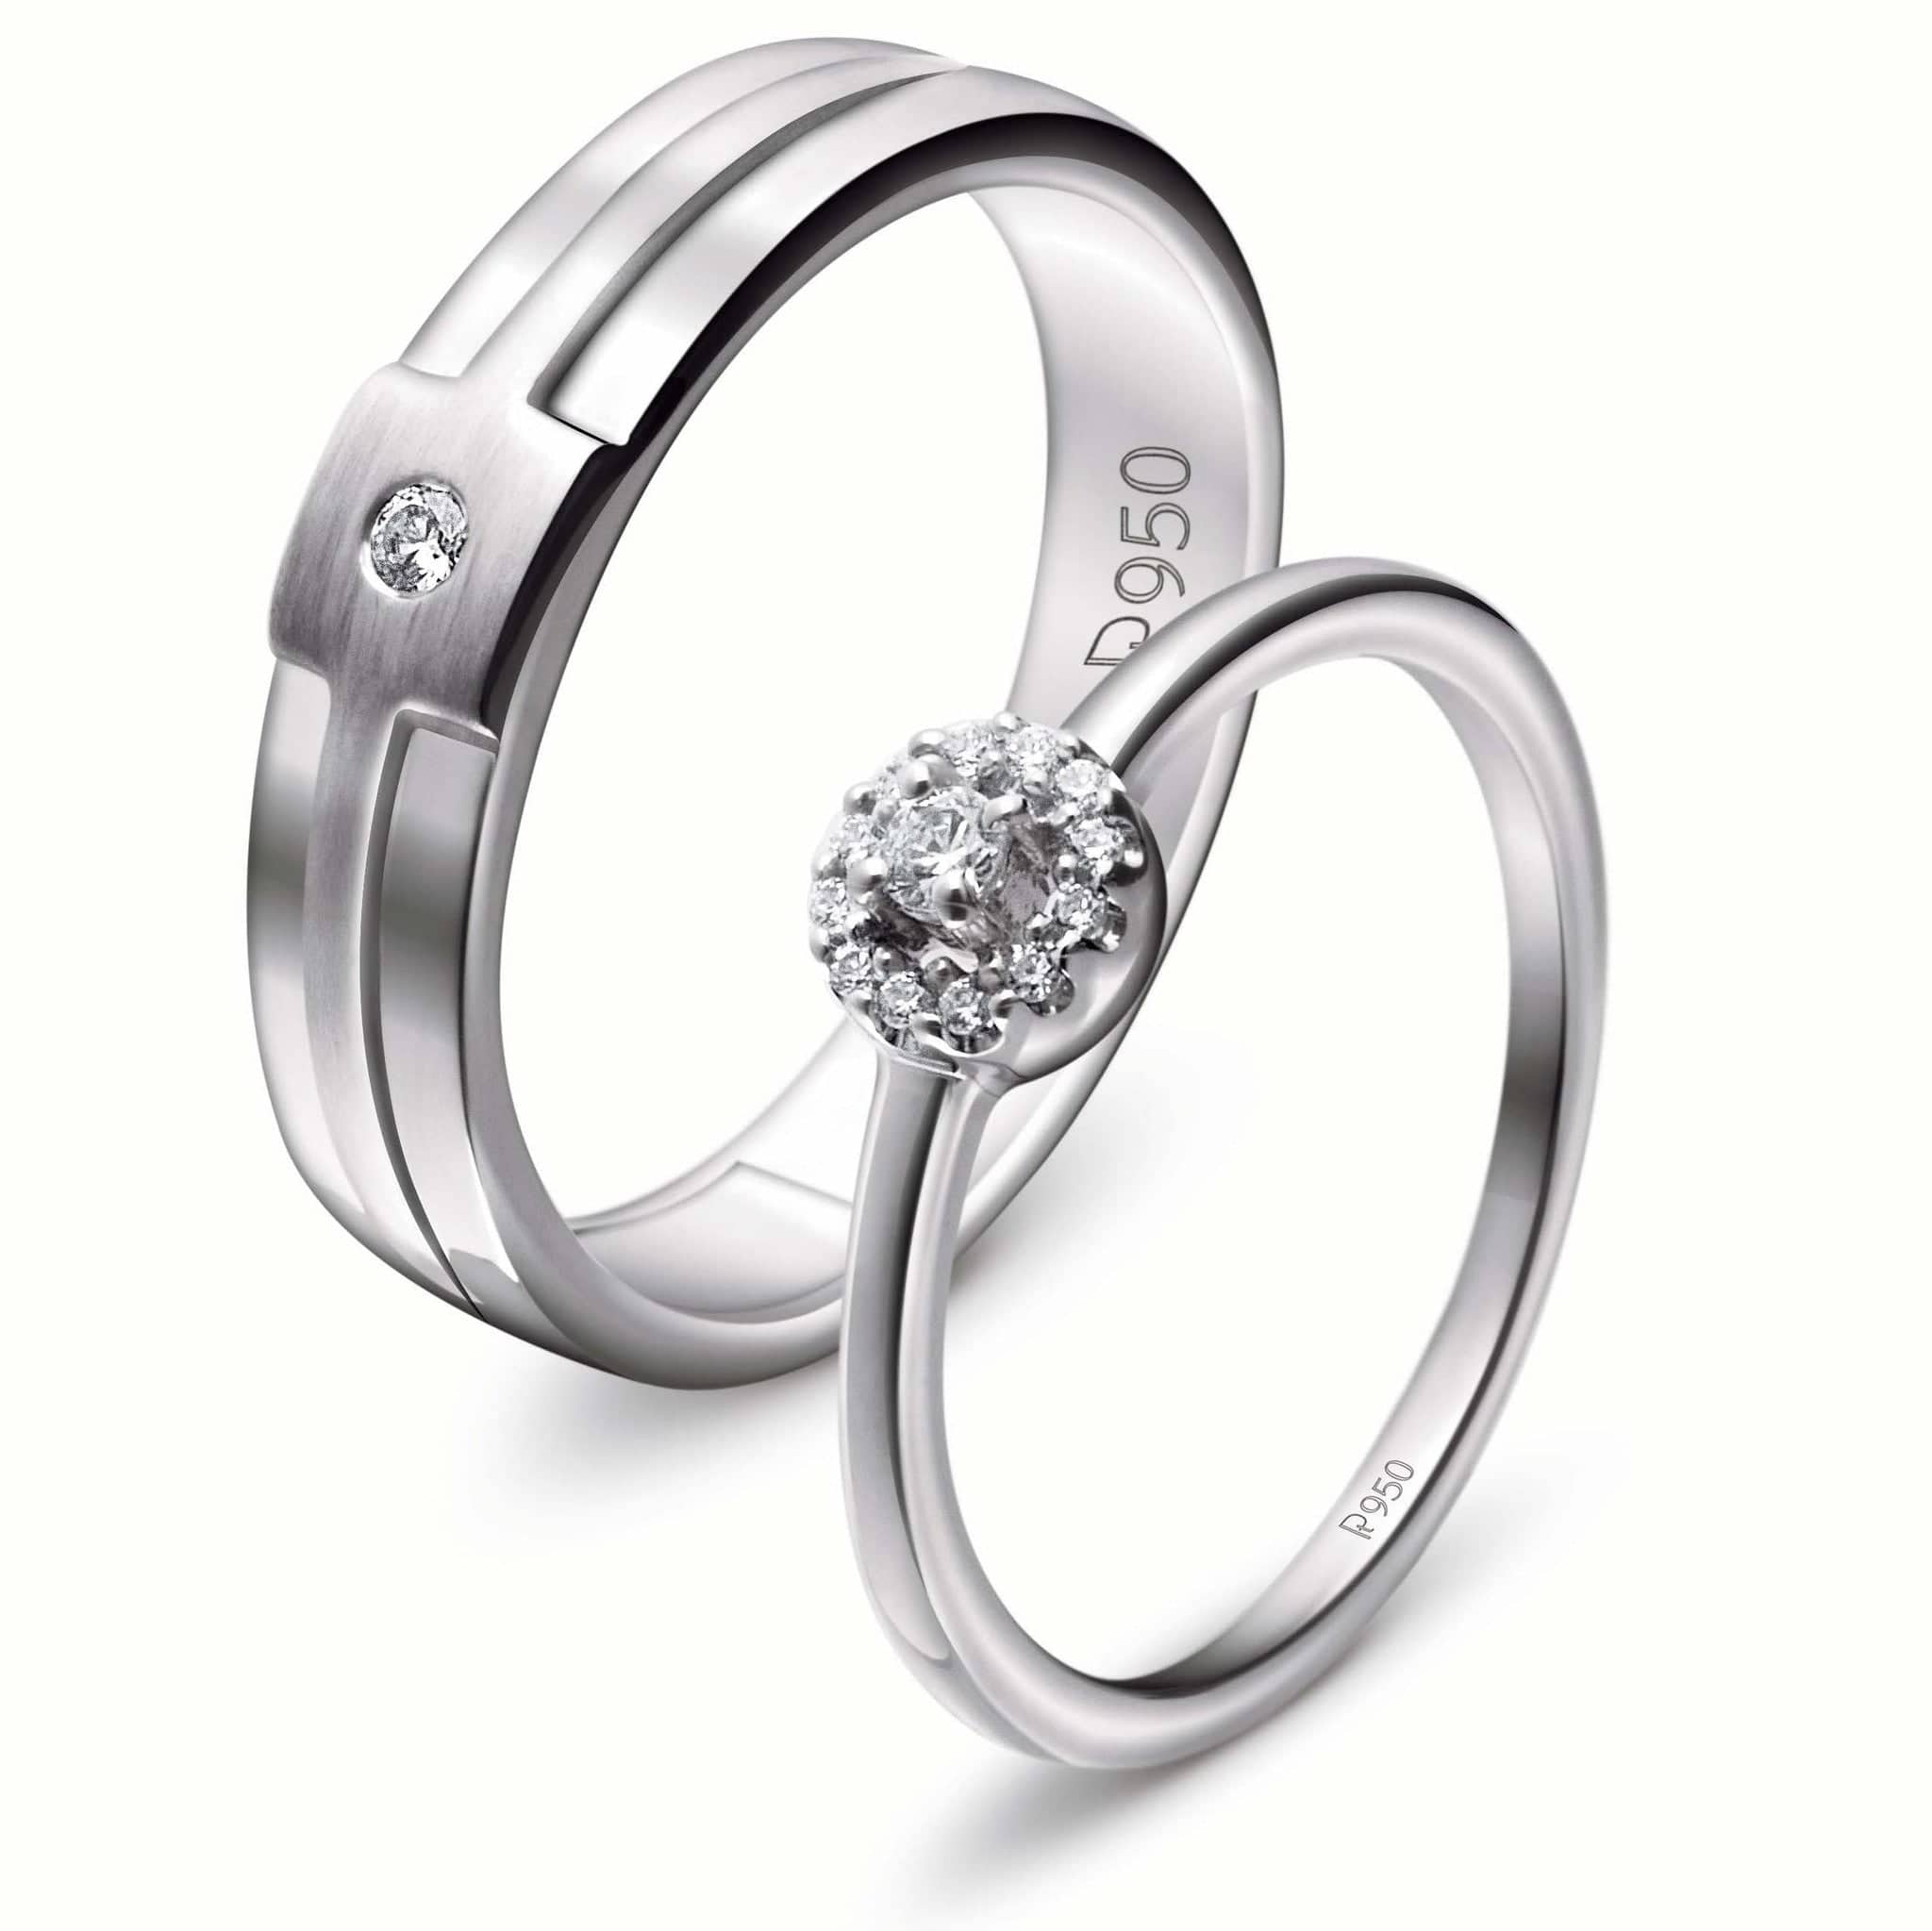 Buy quality 950 Platinum Oriel Love Couple Ring for Unisex in Ahmedabad